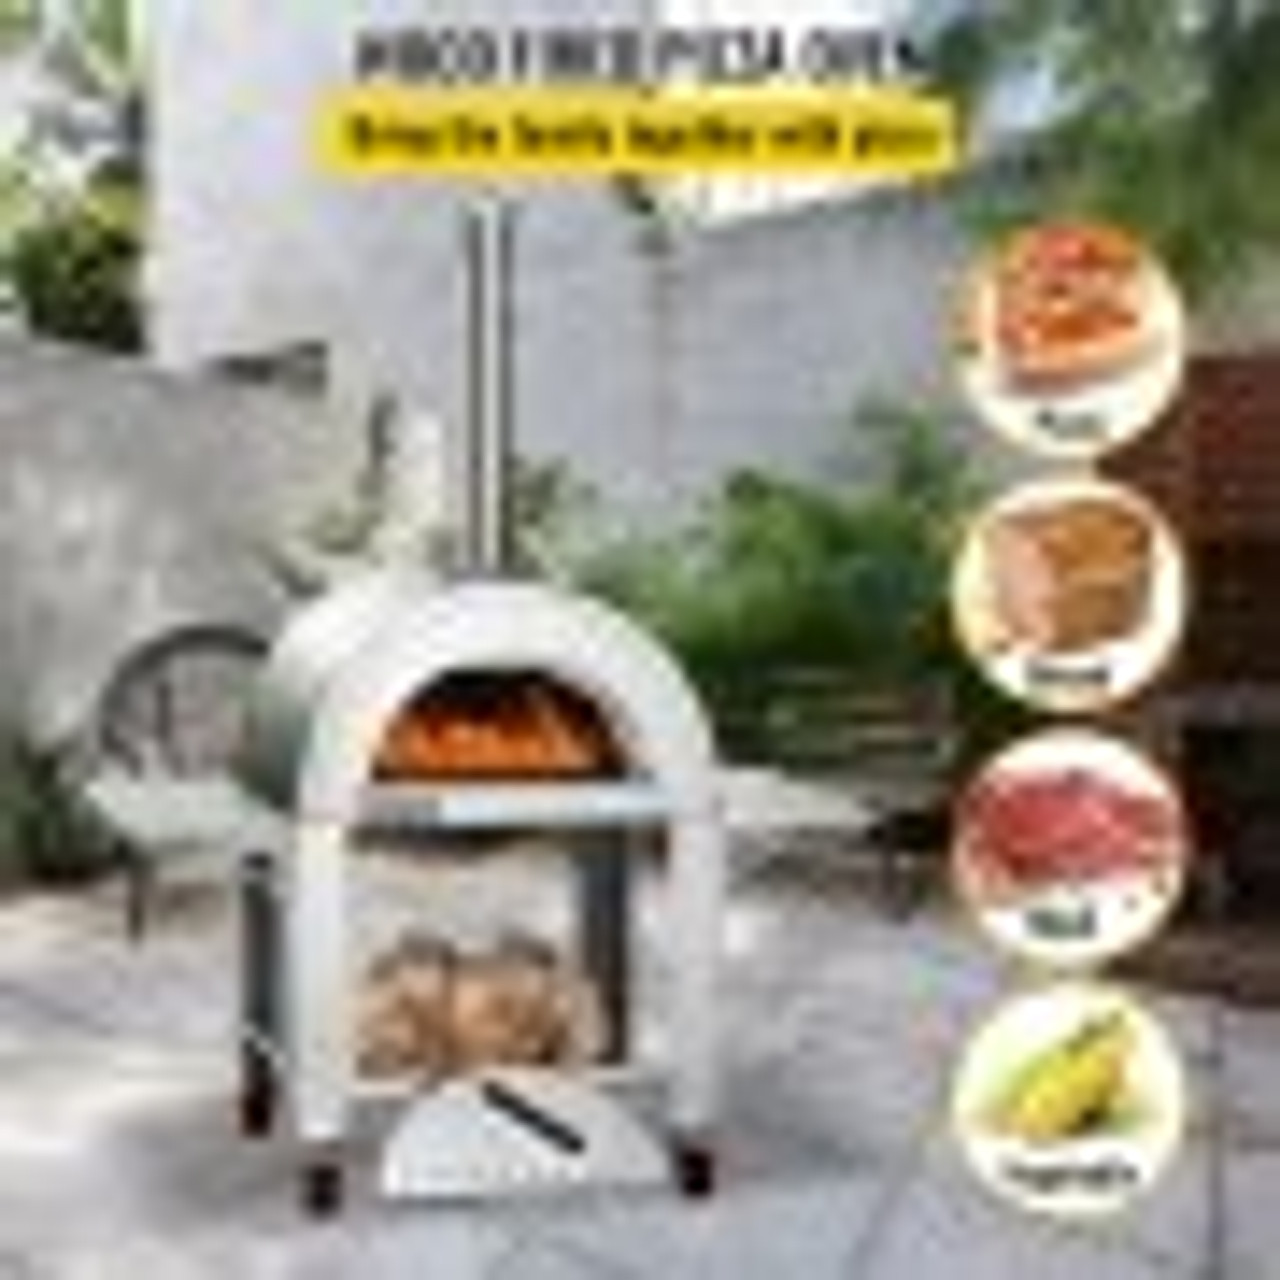 46" Wood Fired Artisan Pizza Oven, 3-Layer Stainless Steel Pizza Maker with Wheels for Outside Kitchen, Includes Pizza Stone, Pizza Peel, and Brush, Professional Series,Outdoor or Indoor.